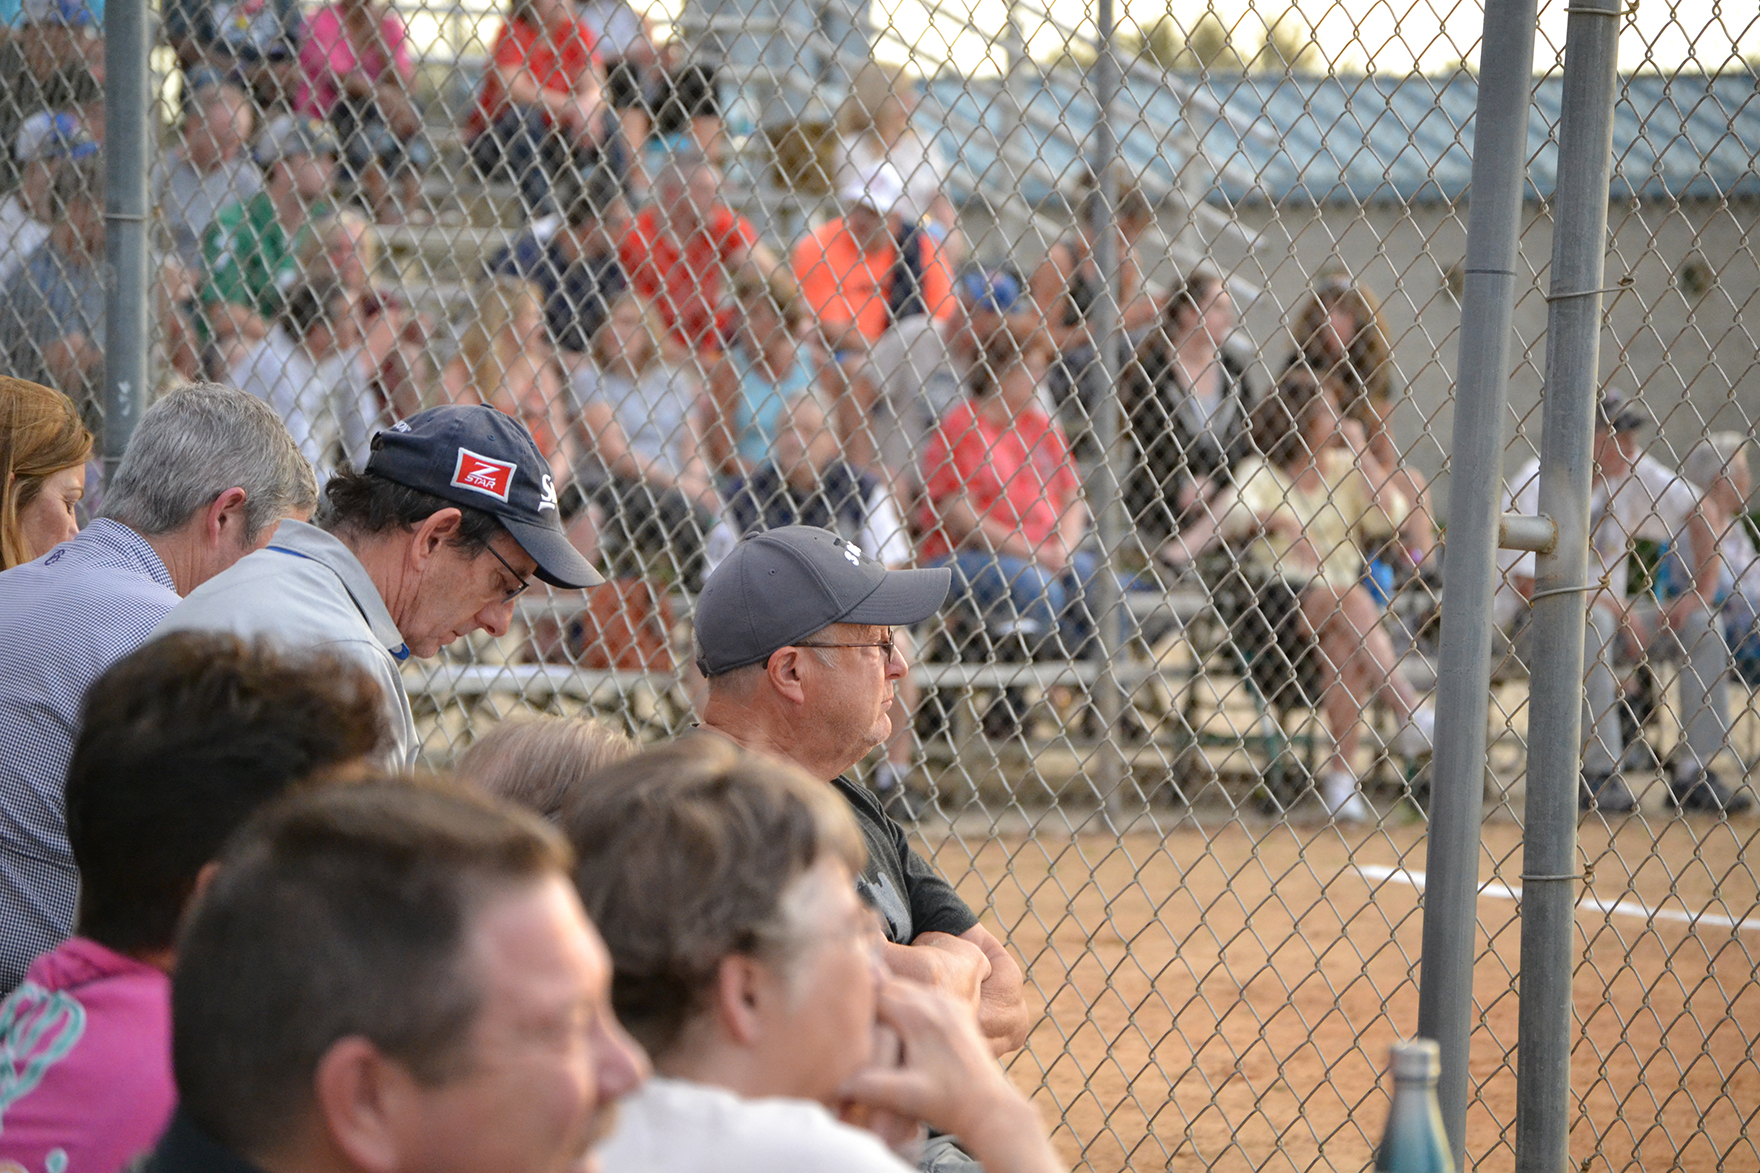 The crowd watches the game during a senior softball event